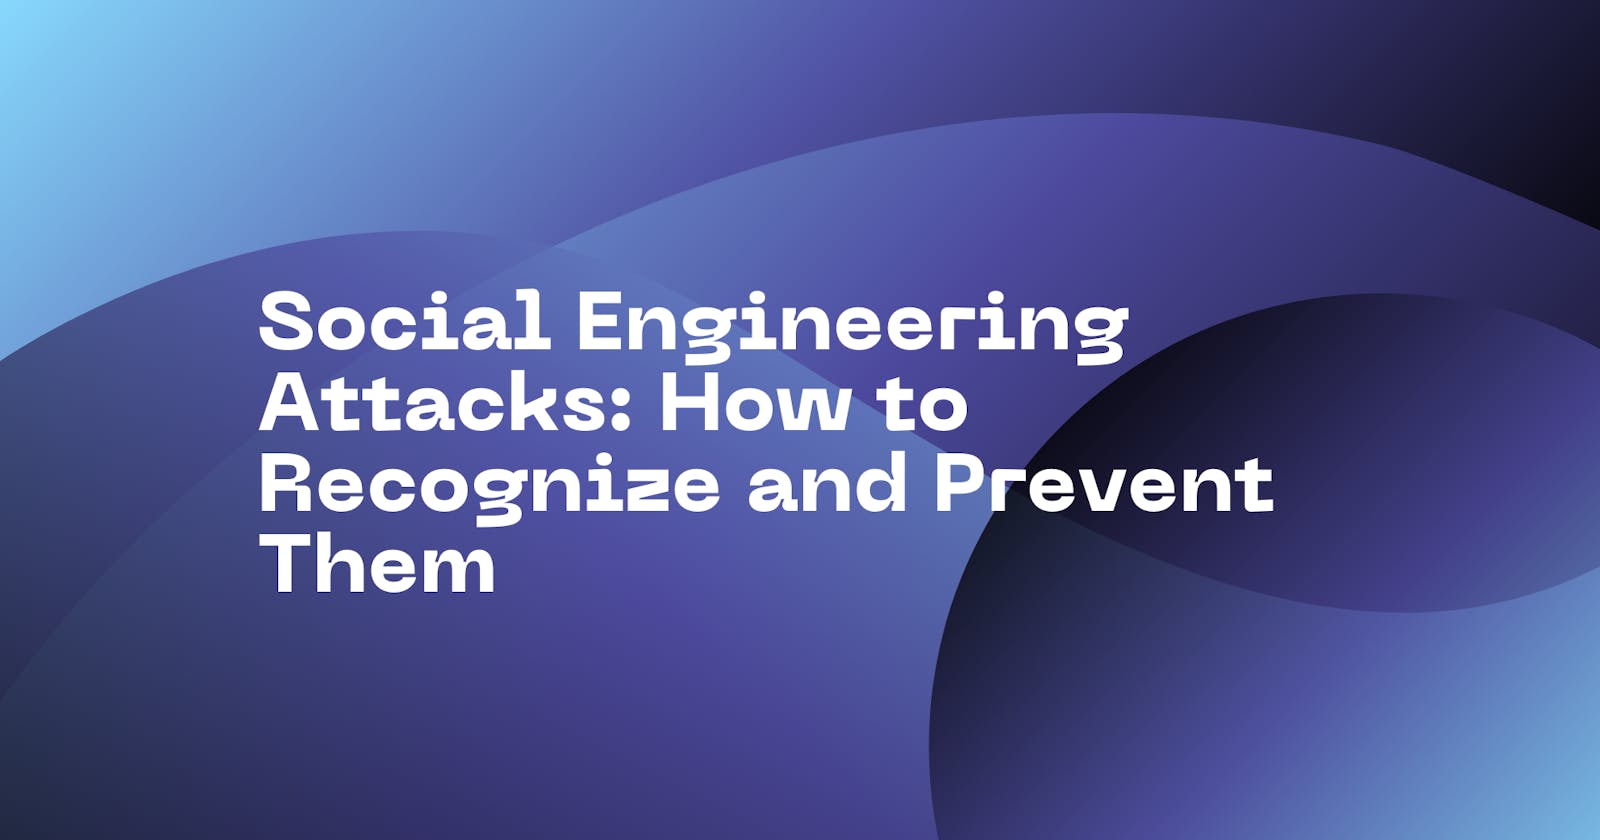 Social Engineering Attacks: How to Recognize and Prevent Them